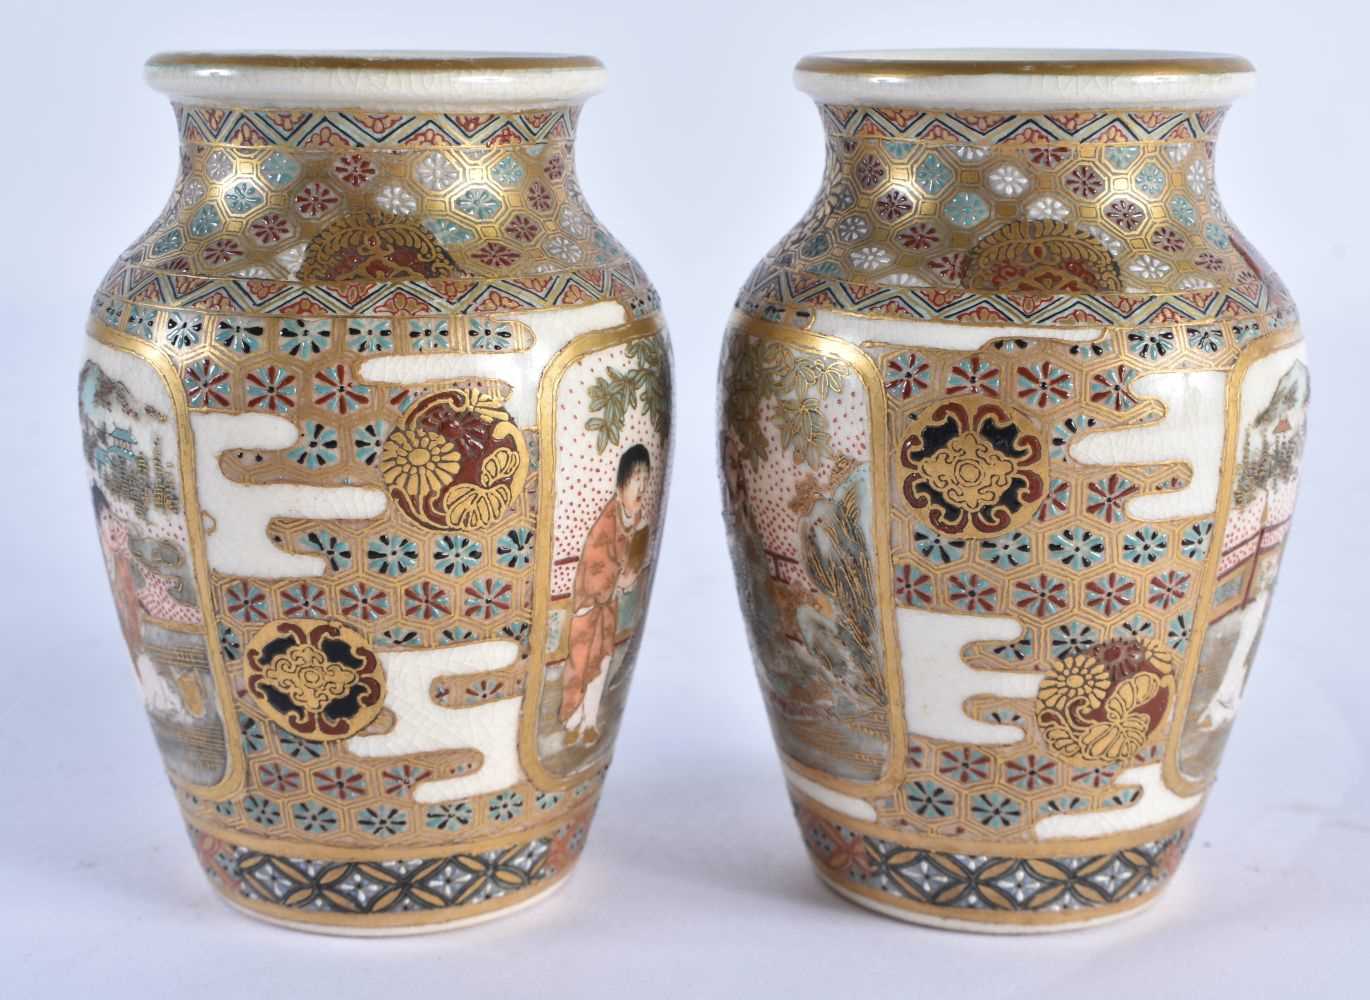 A SMALL PAIR OF 19TH CENTURY JAPANESE MEIJI PERIOD SATSUMA VASES painted with figures and - Image 4 of 8